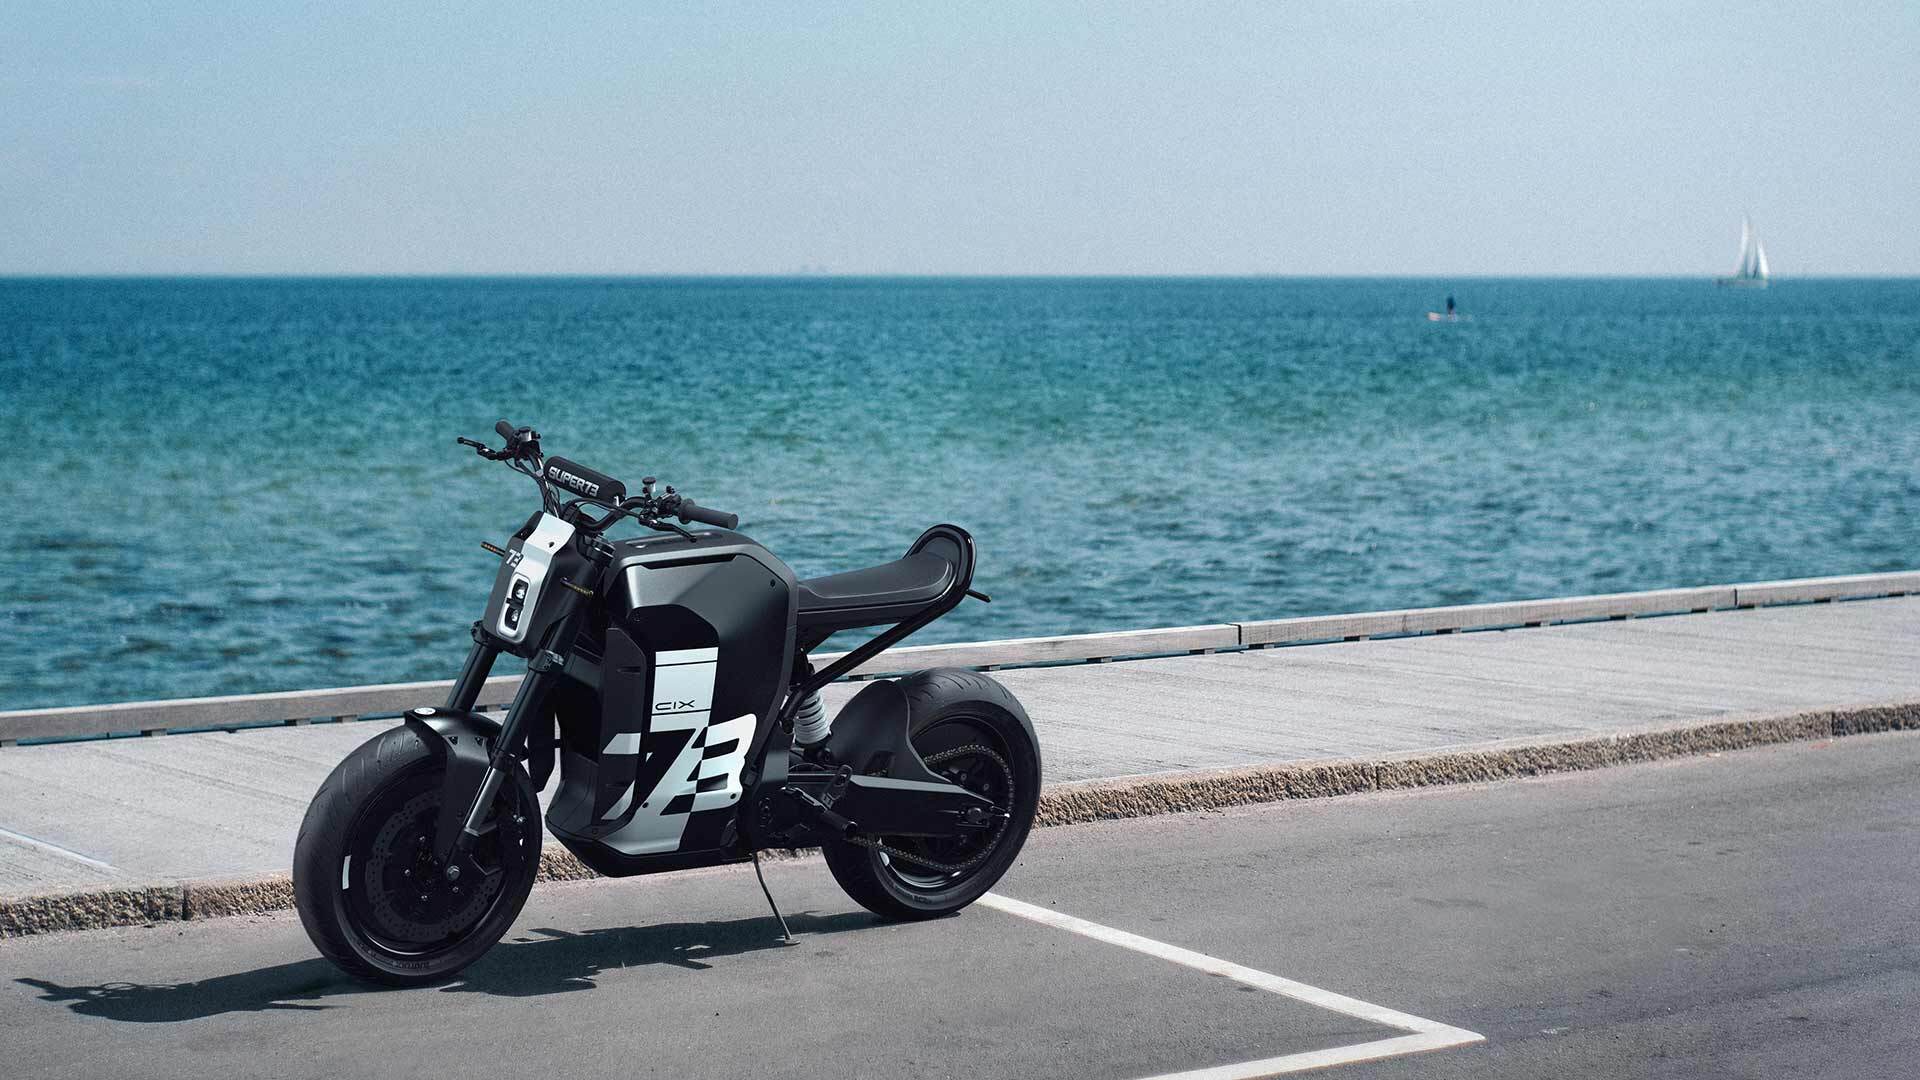 Lifestyle image with side view of the C1X bike near the ocean